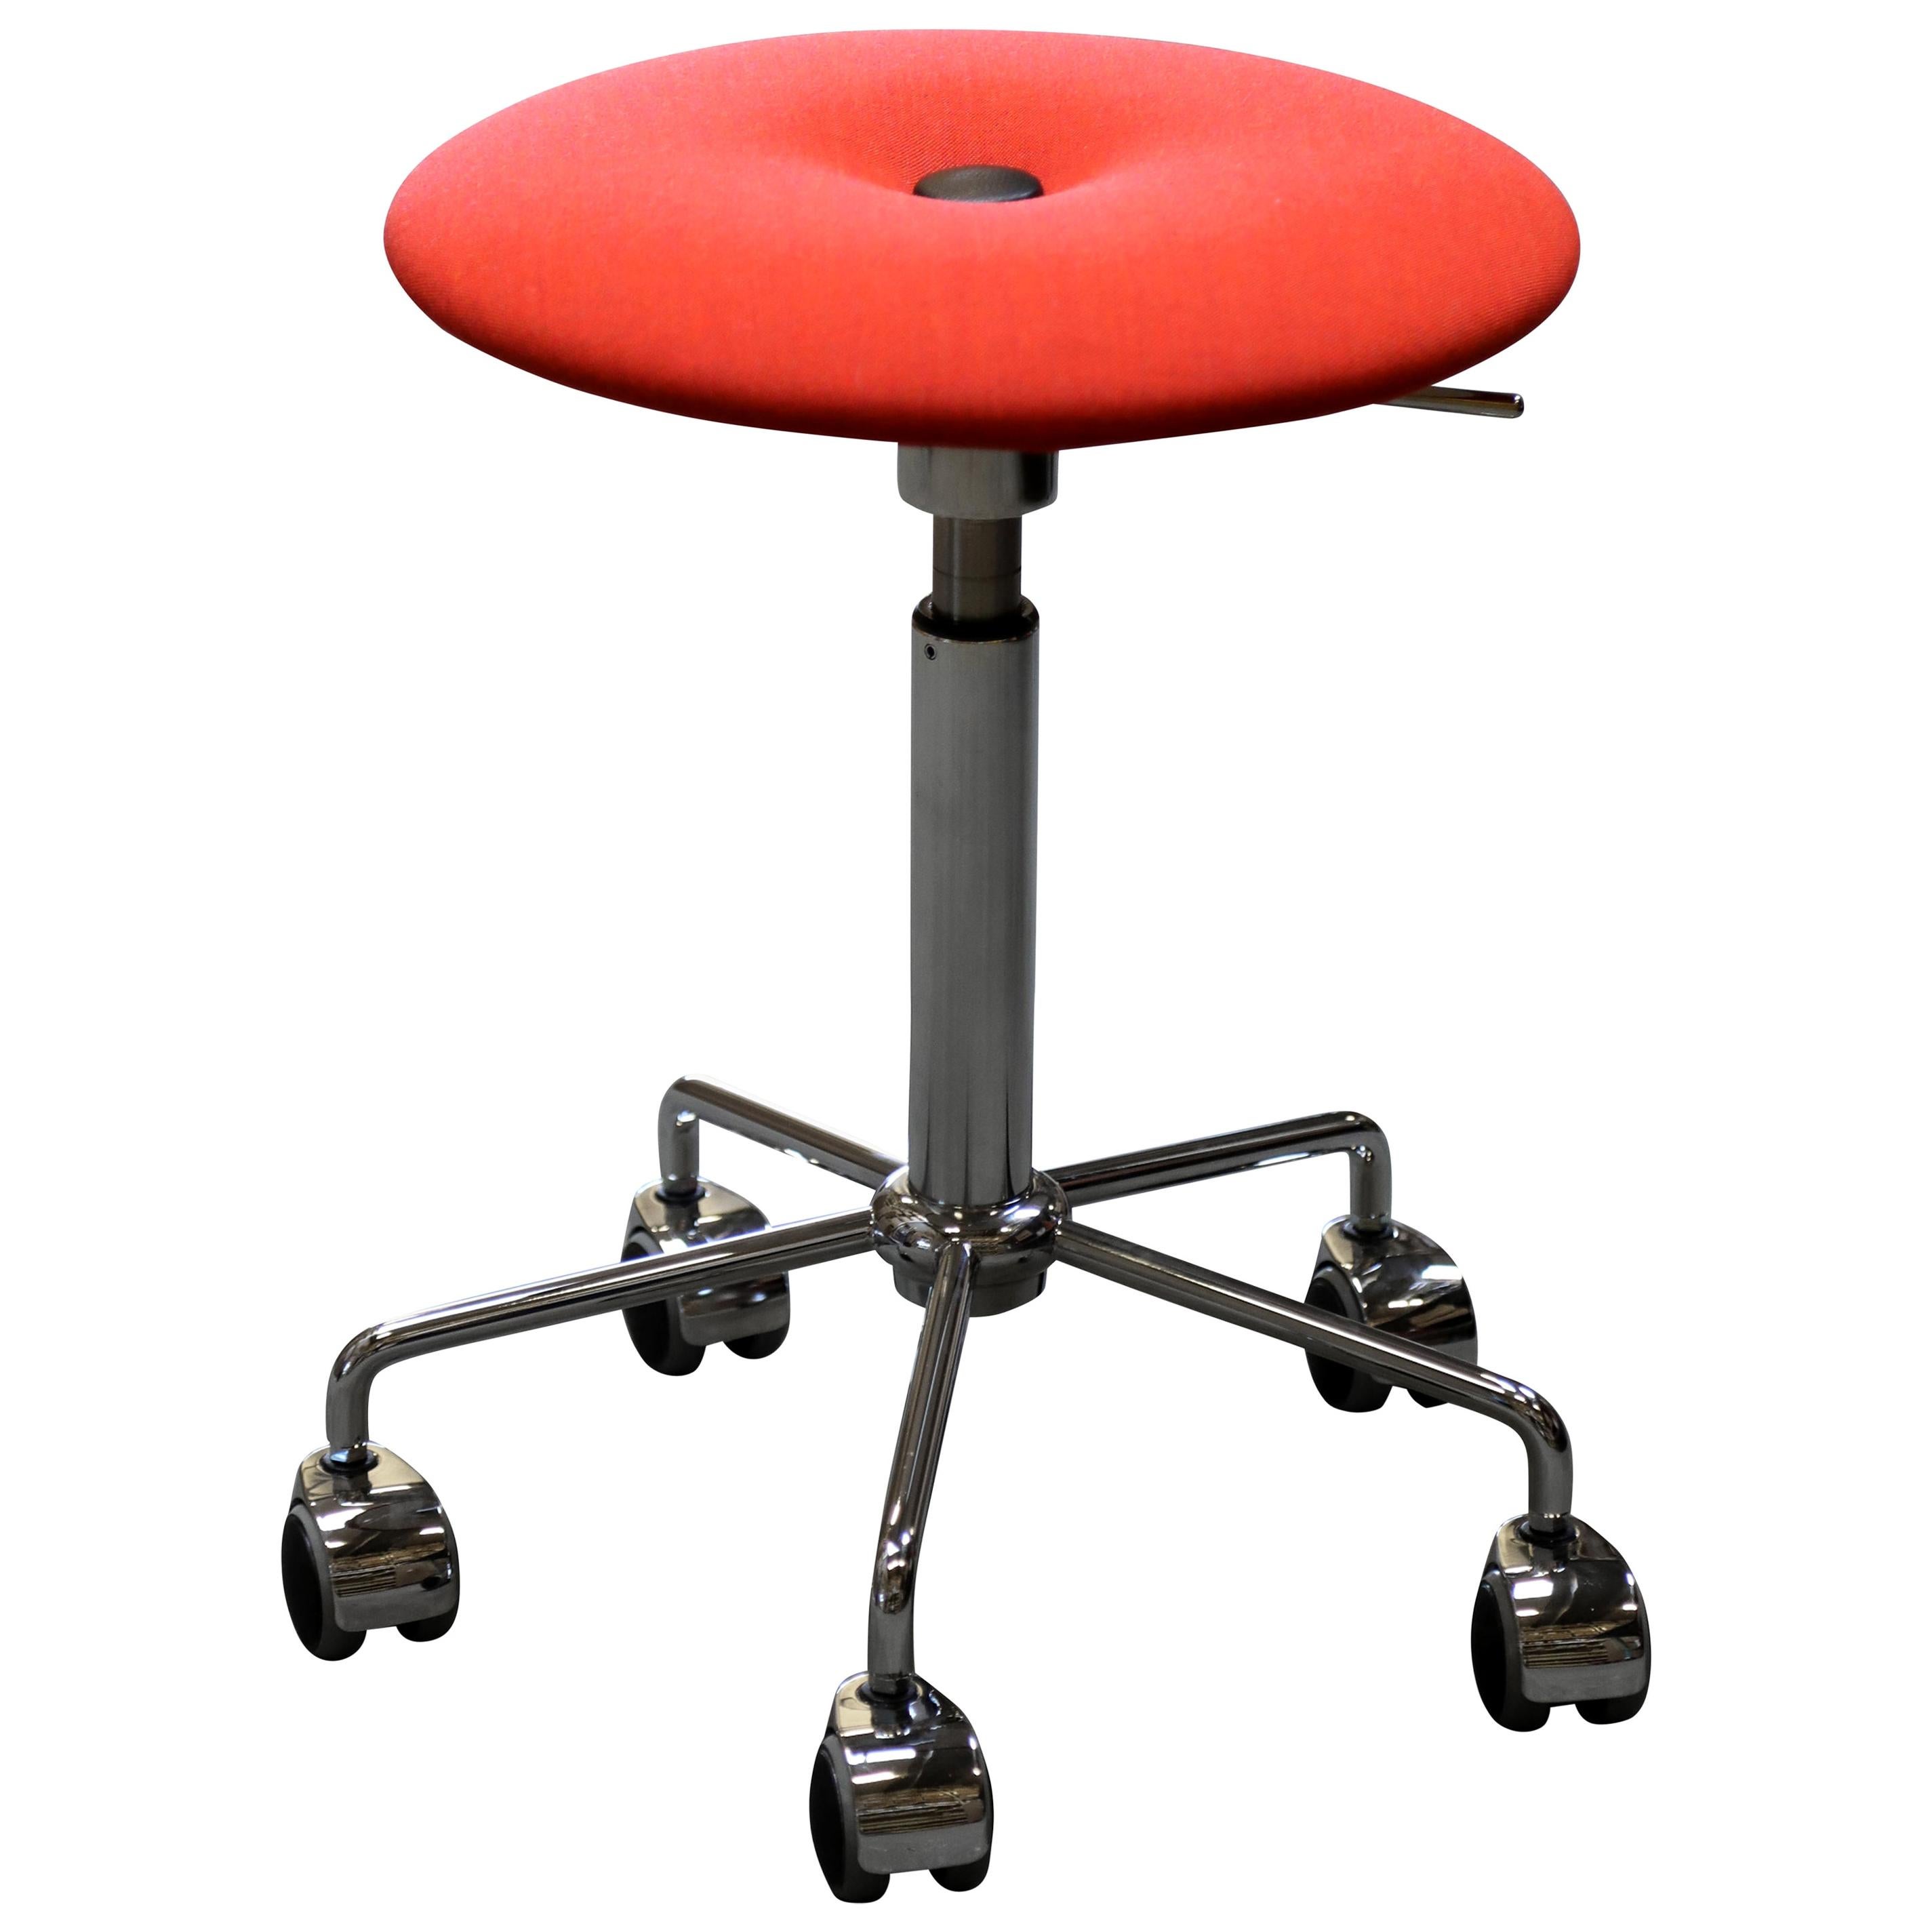 Henrik Tengler, HT 2244 Time Stool by One Collection For Sale